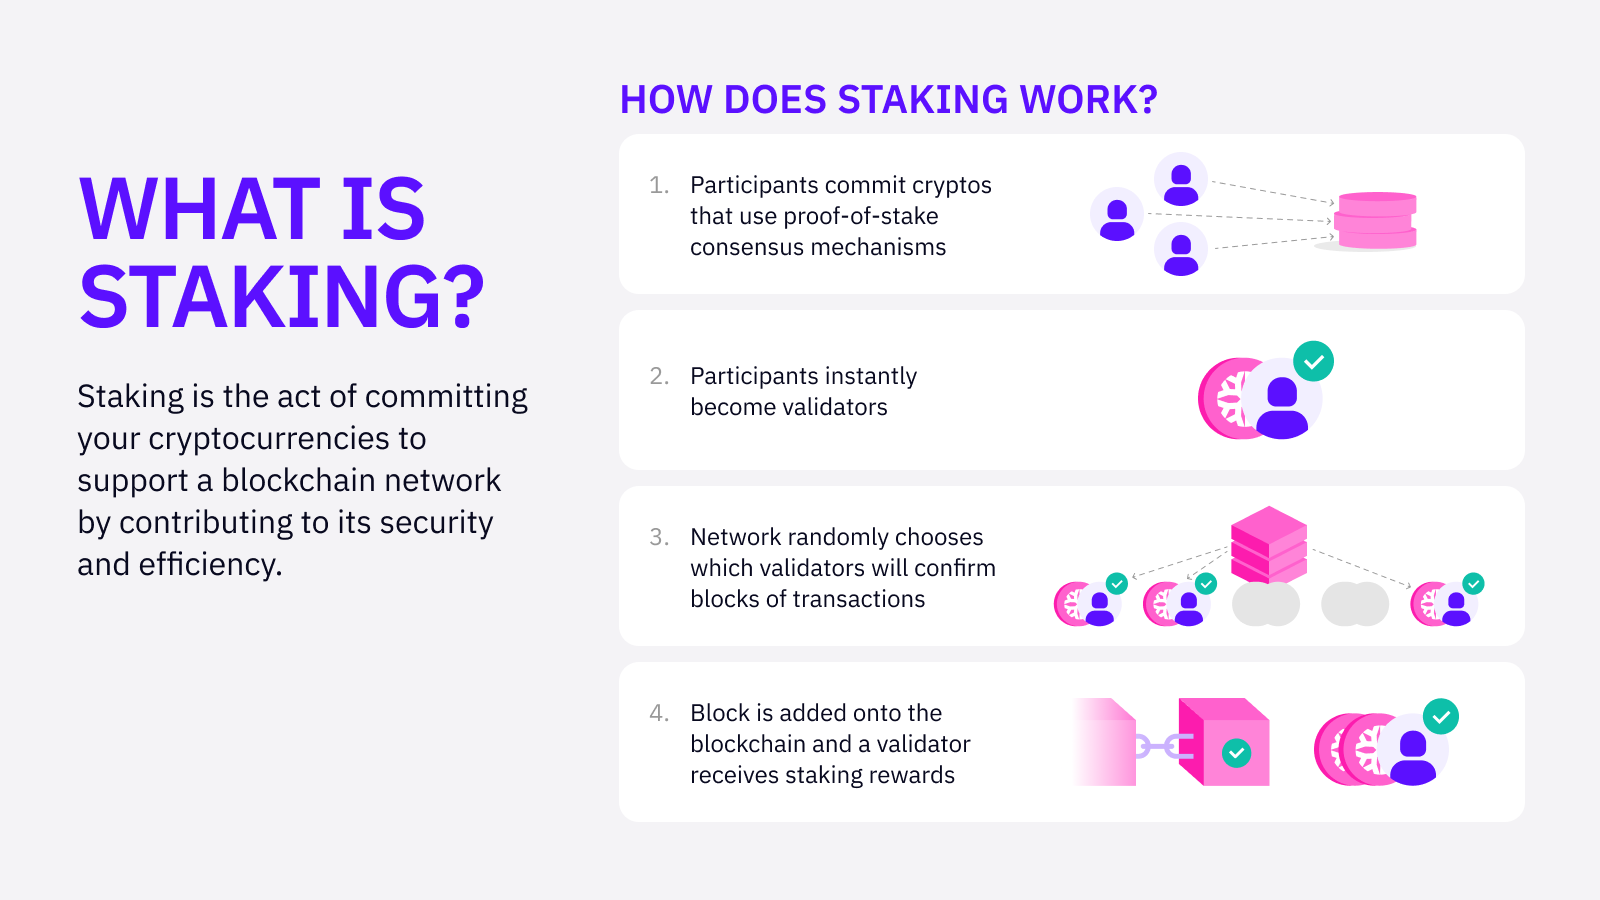 What Is Staking?